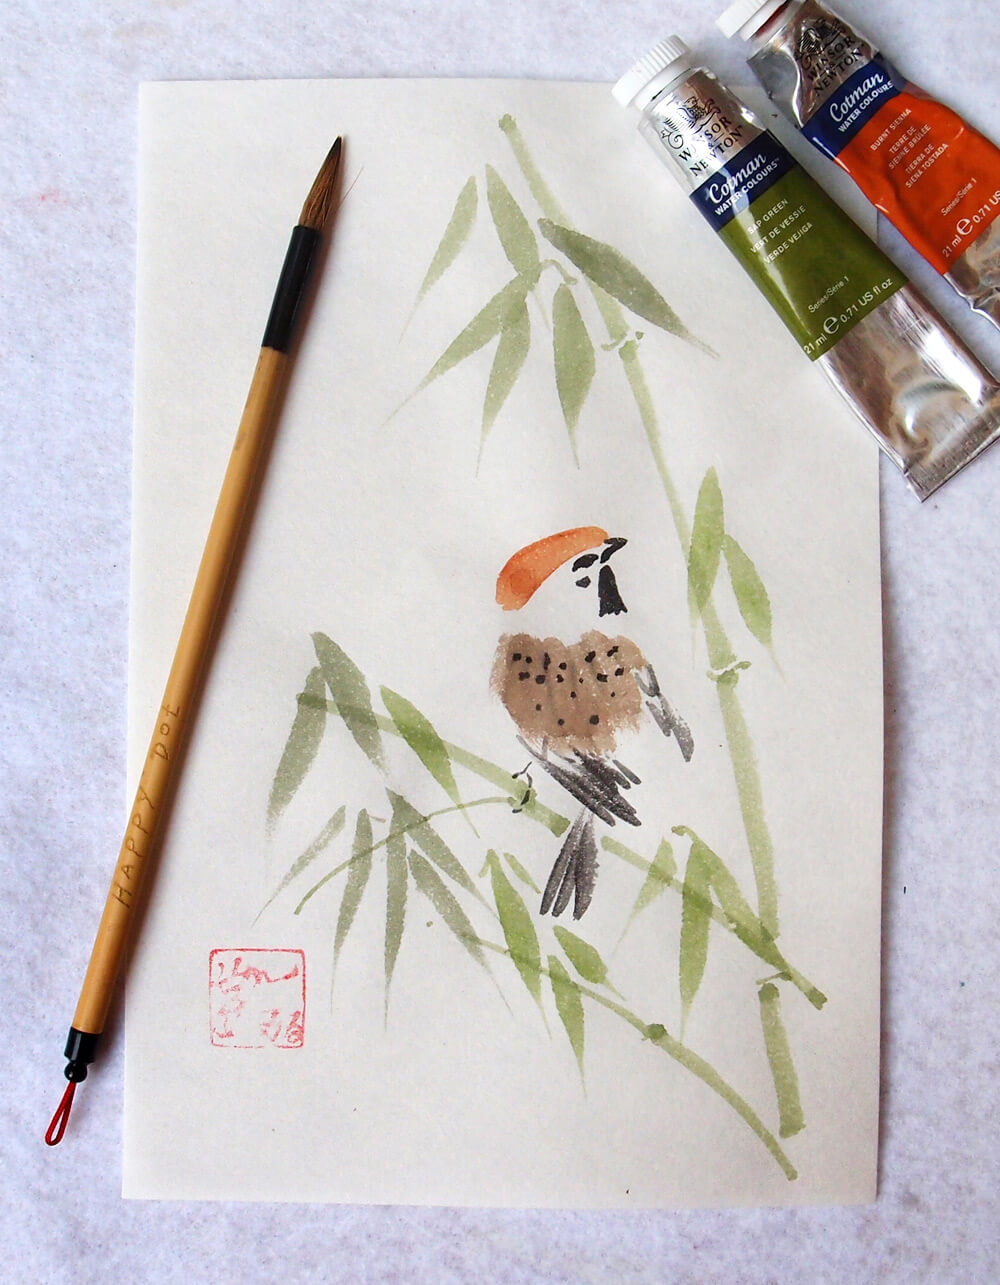 Paint and brush used for sparrow and bamboo painting